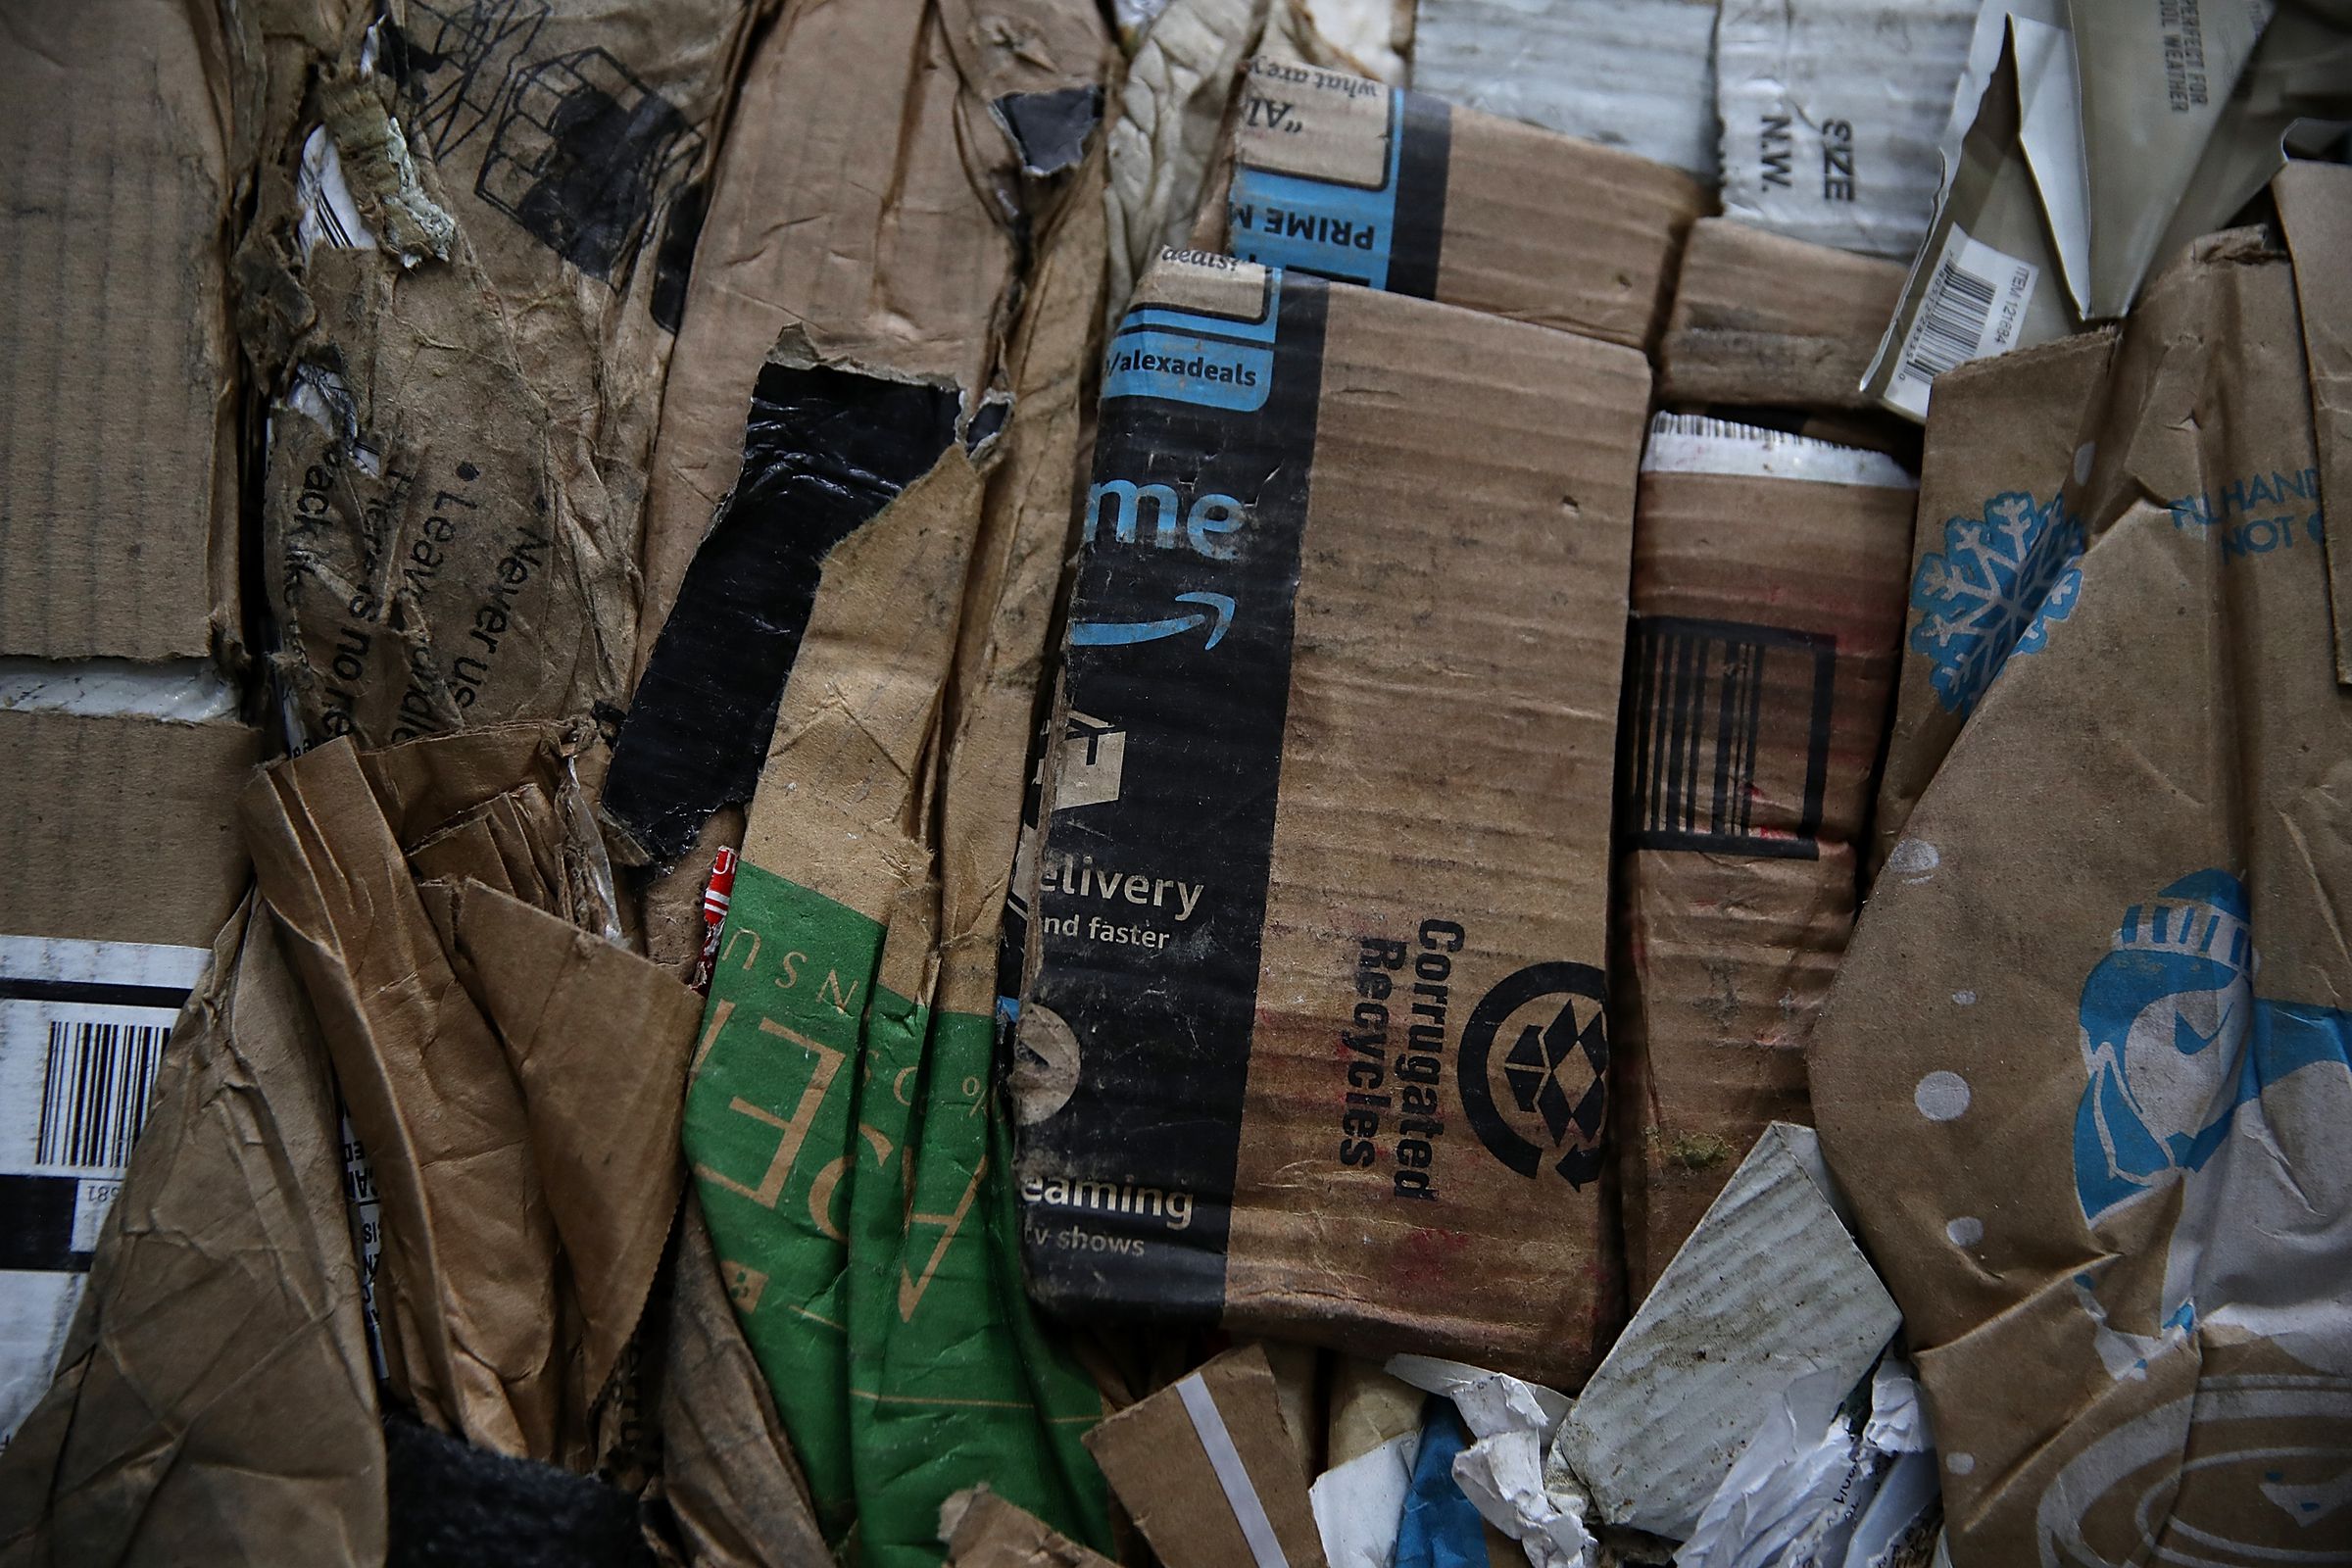 Bay Area Sees Major Spike In Cardboard Recycling After The Holidays